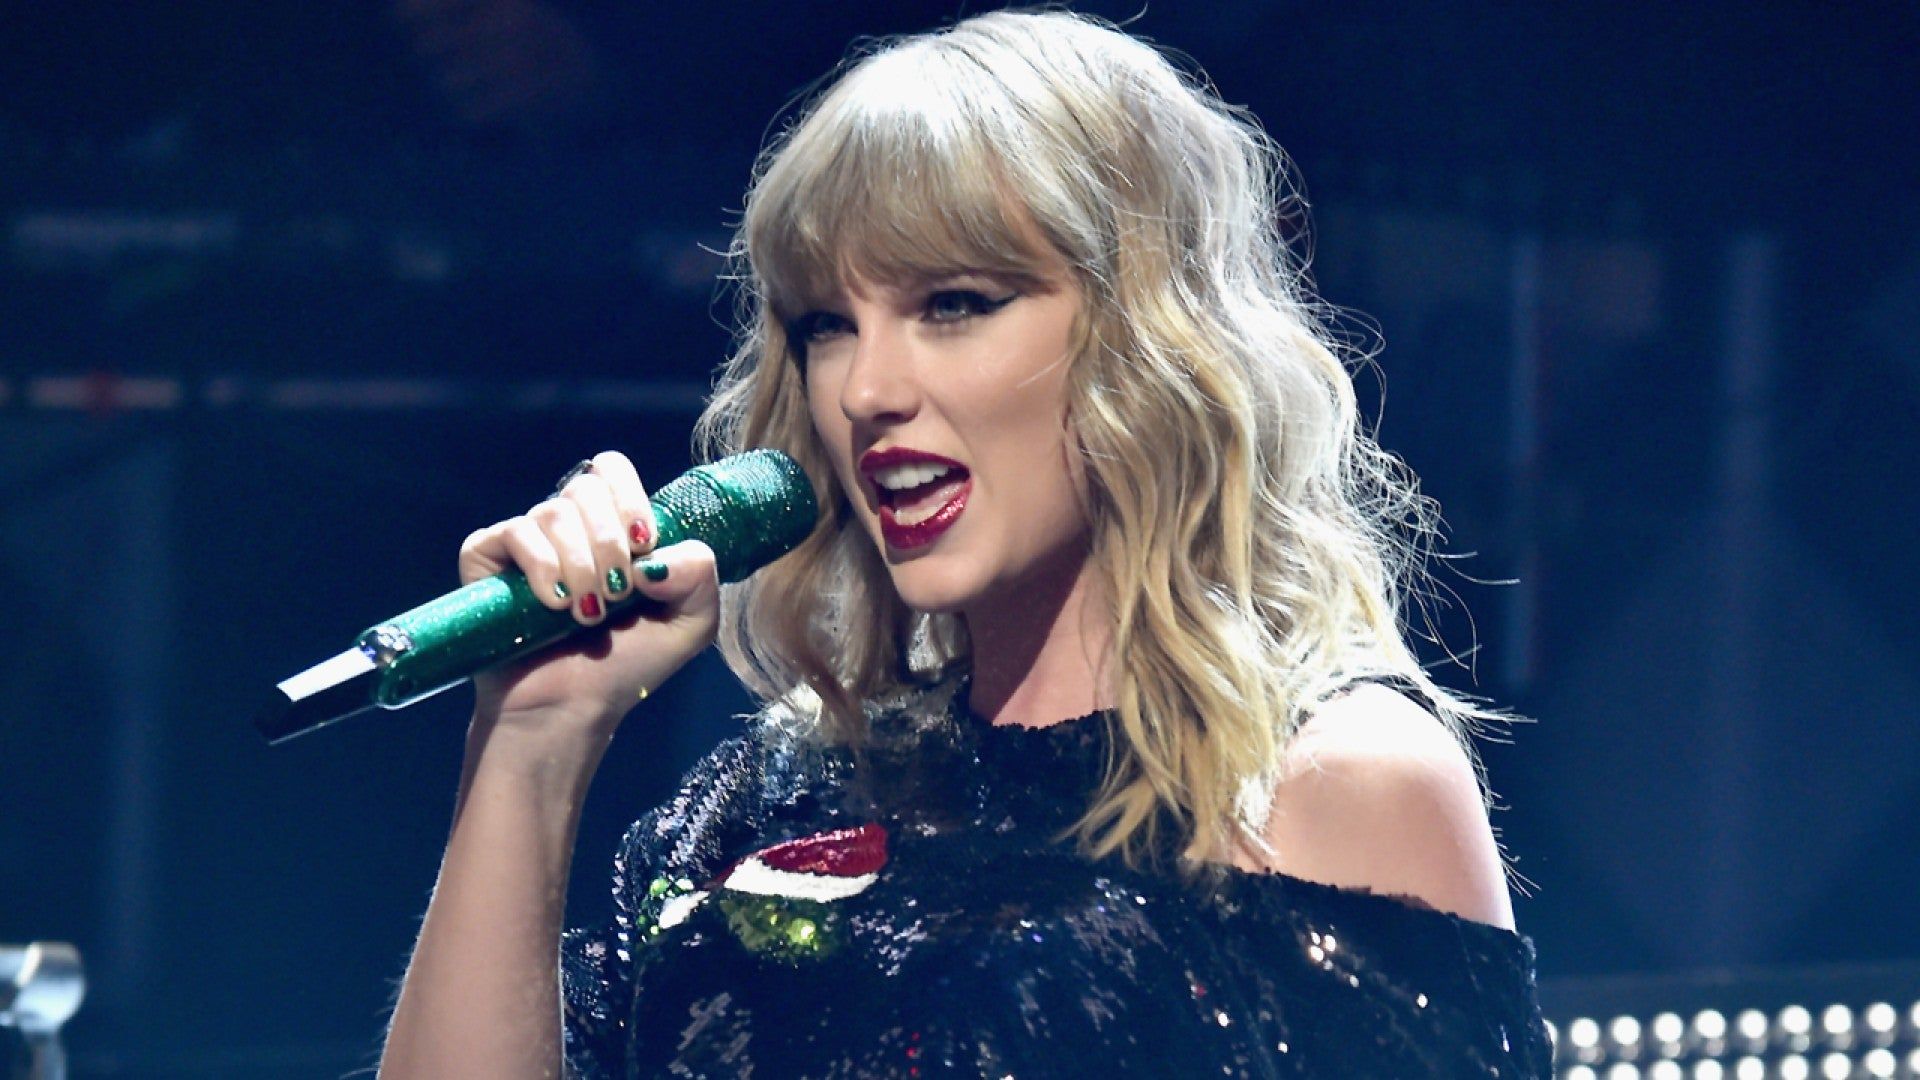 Taylor Swift Visits Burn Victim, Does Private Show for Adoptive